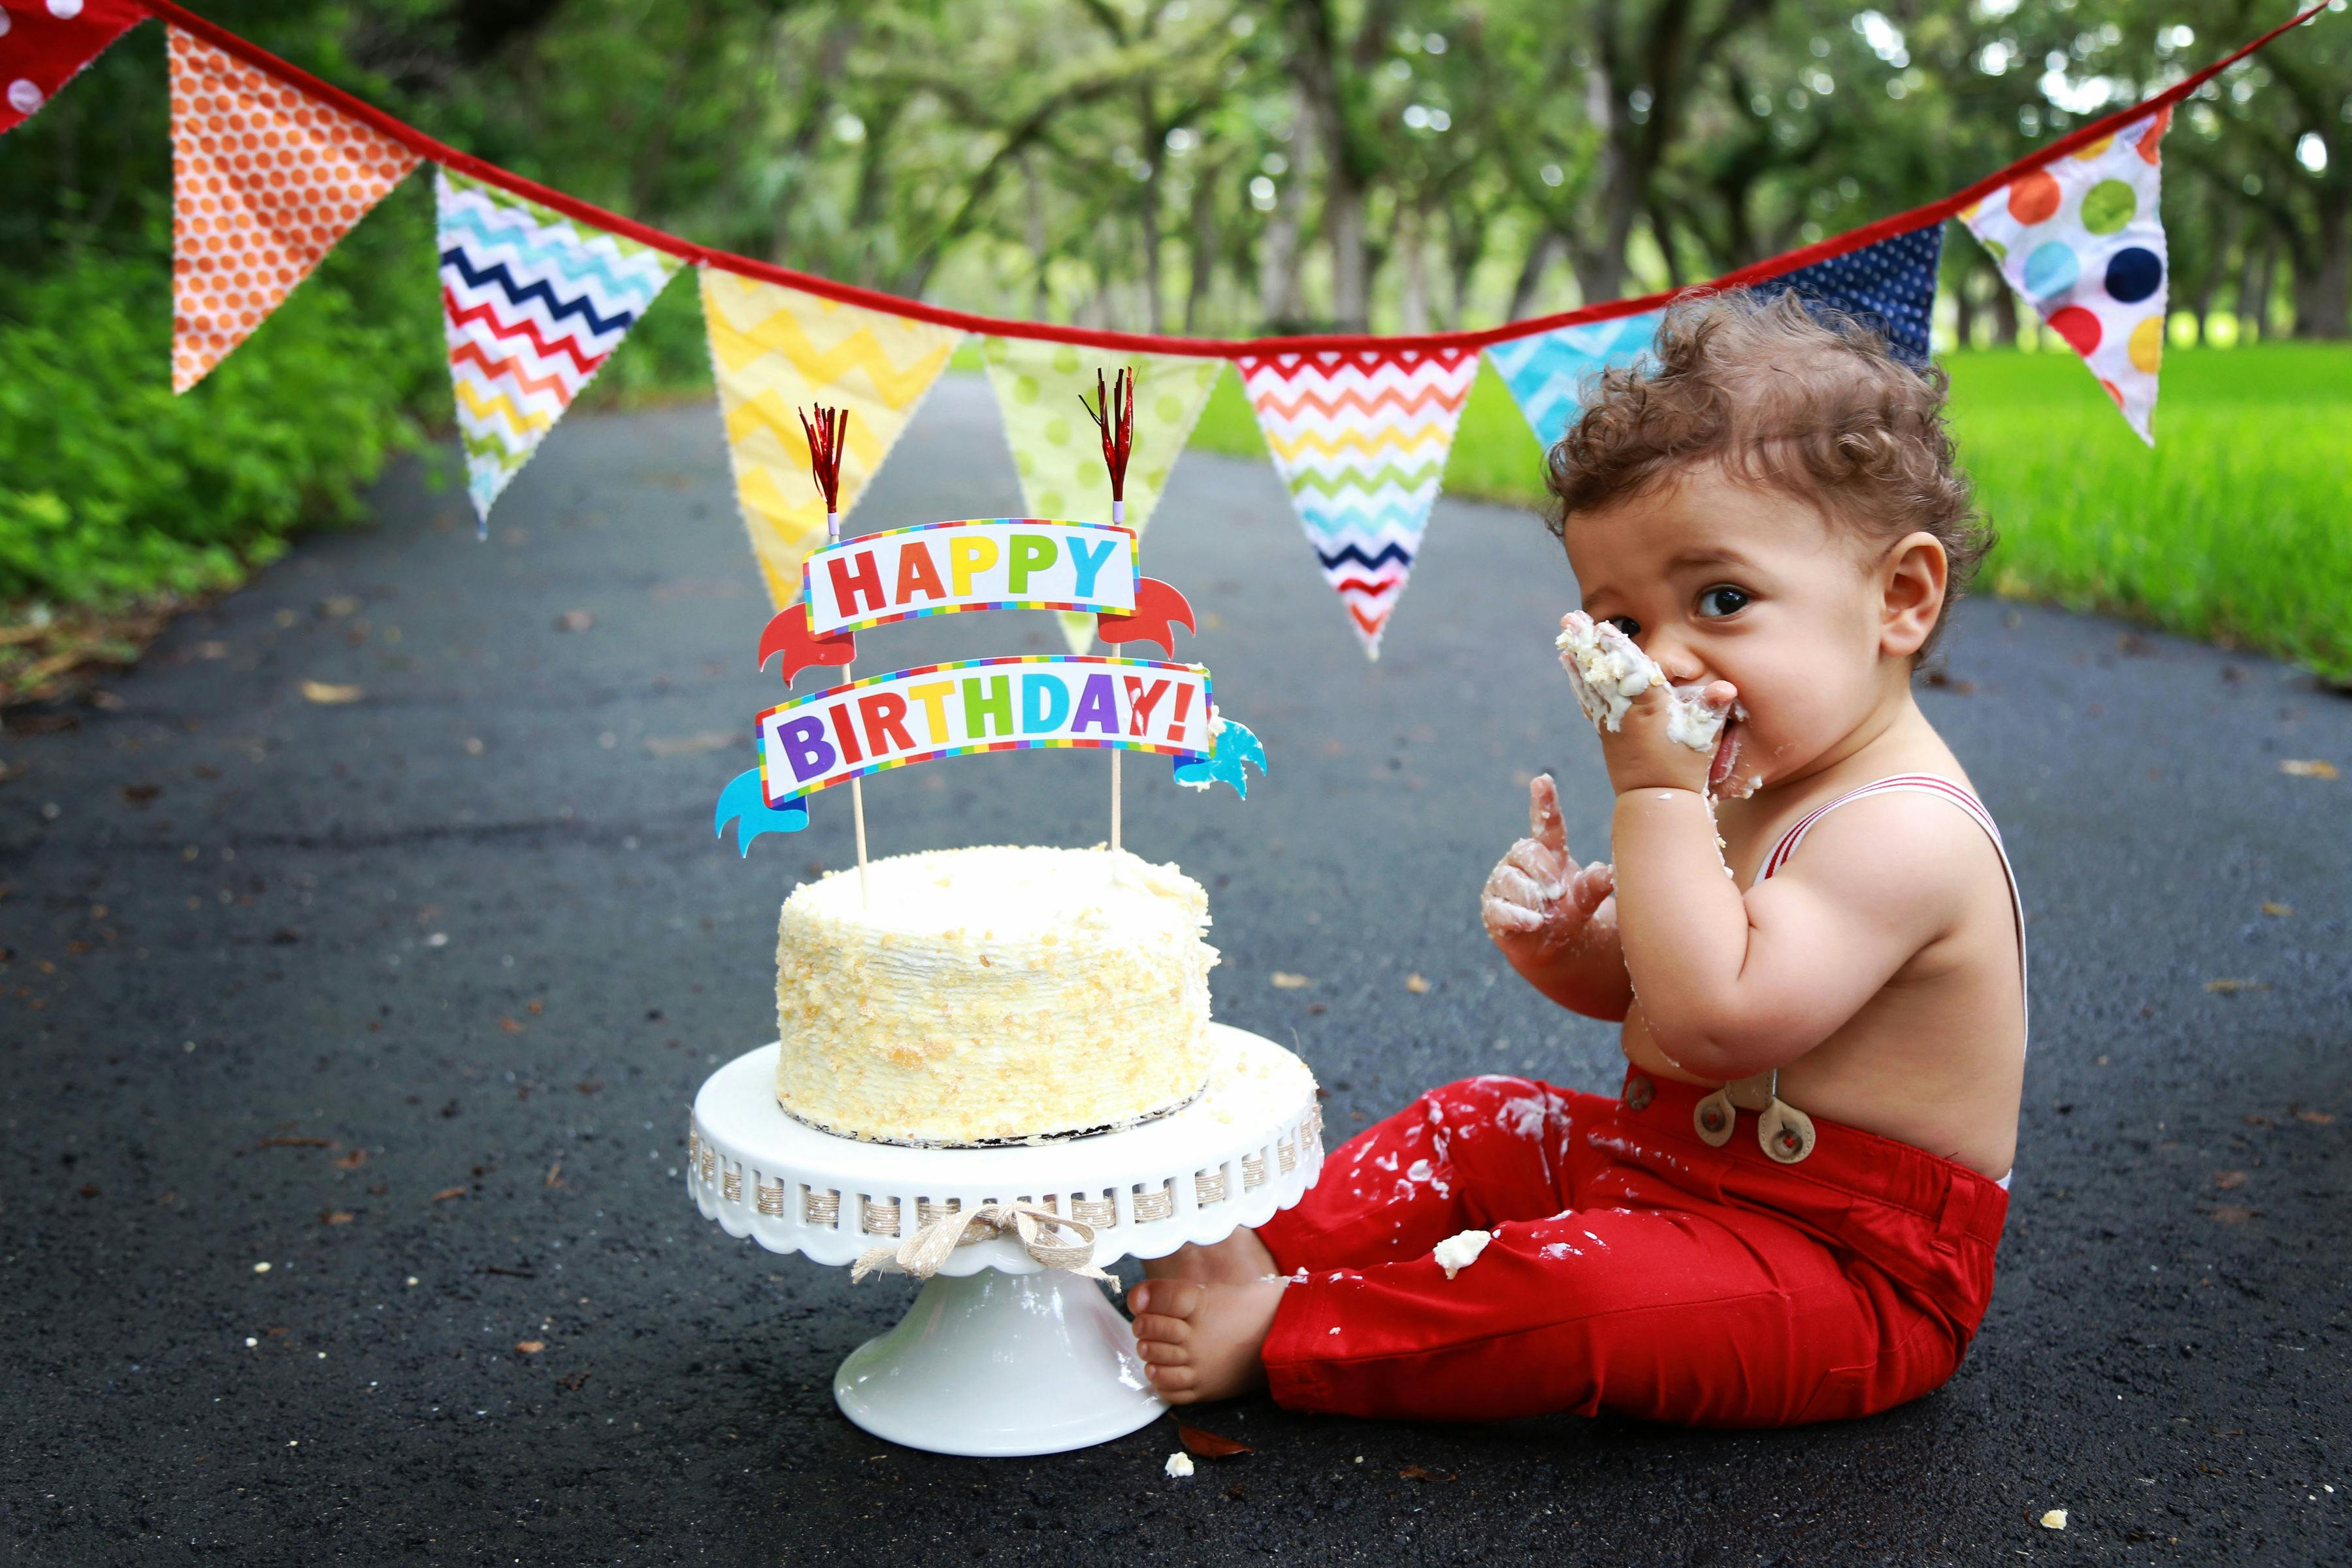 Can I feed a two month old child a small bit of birthday cake? - Quora